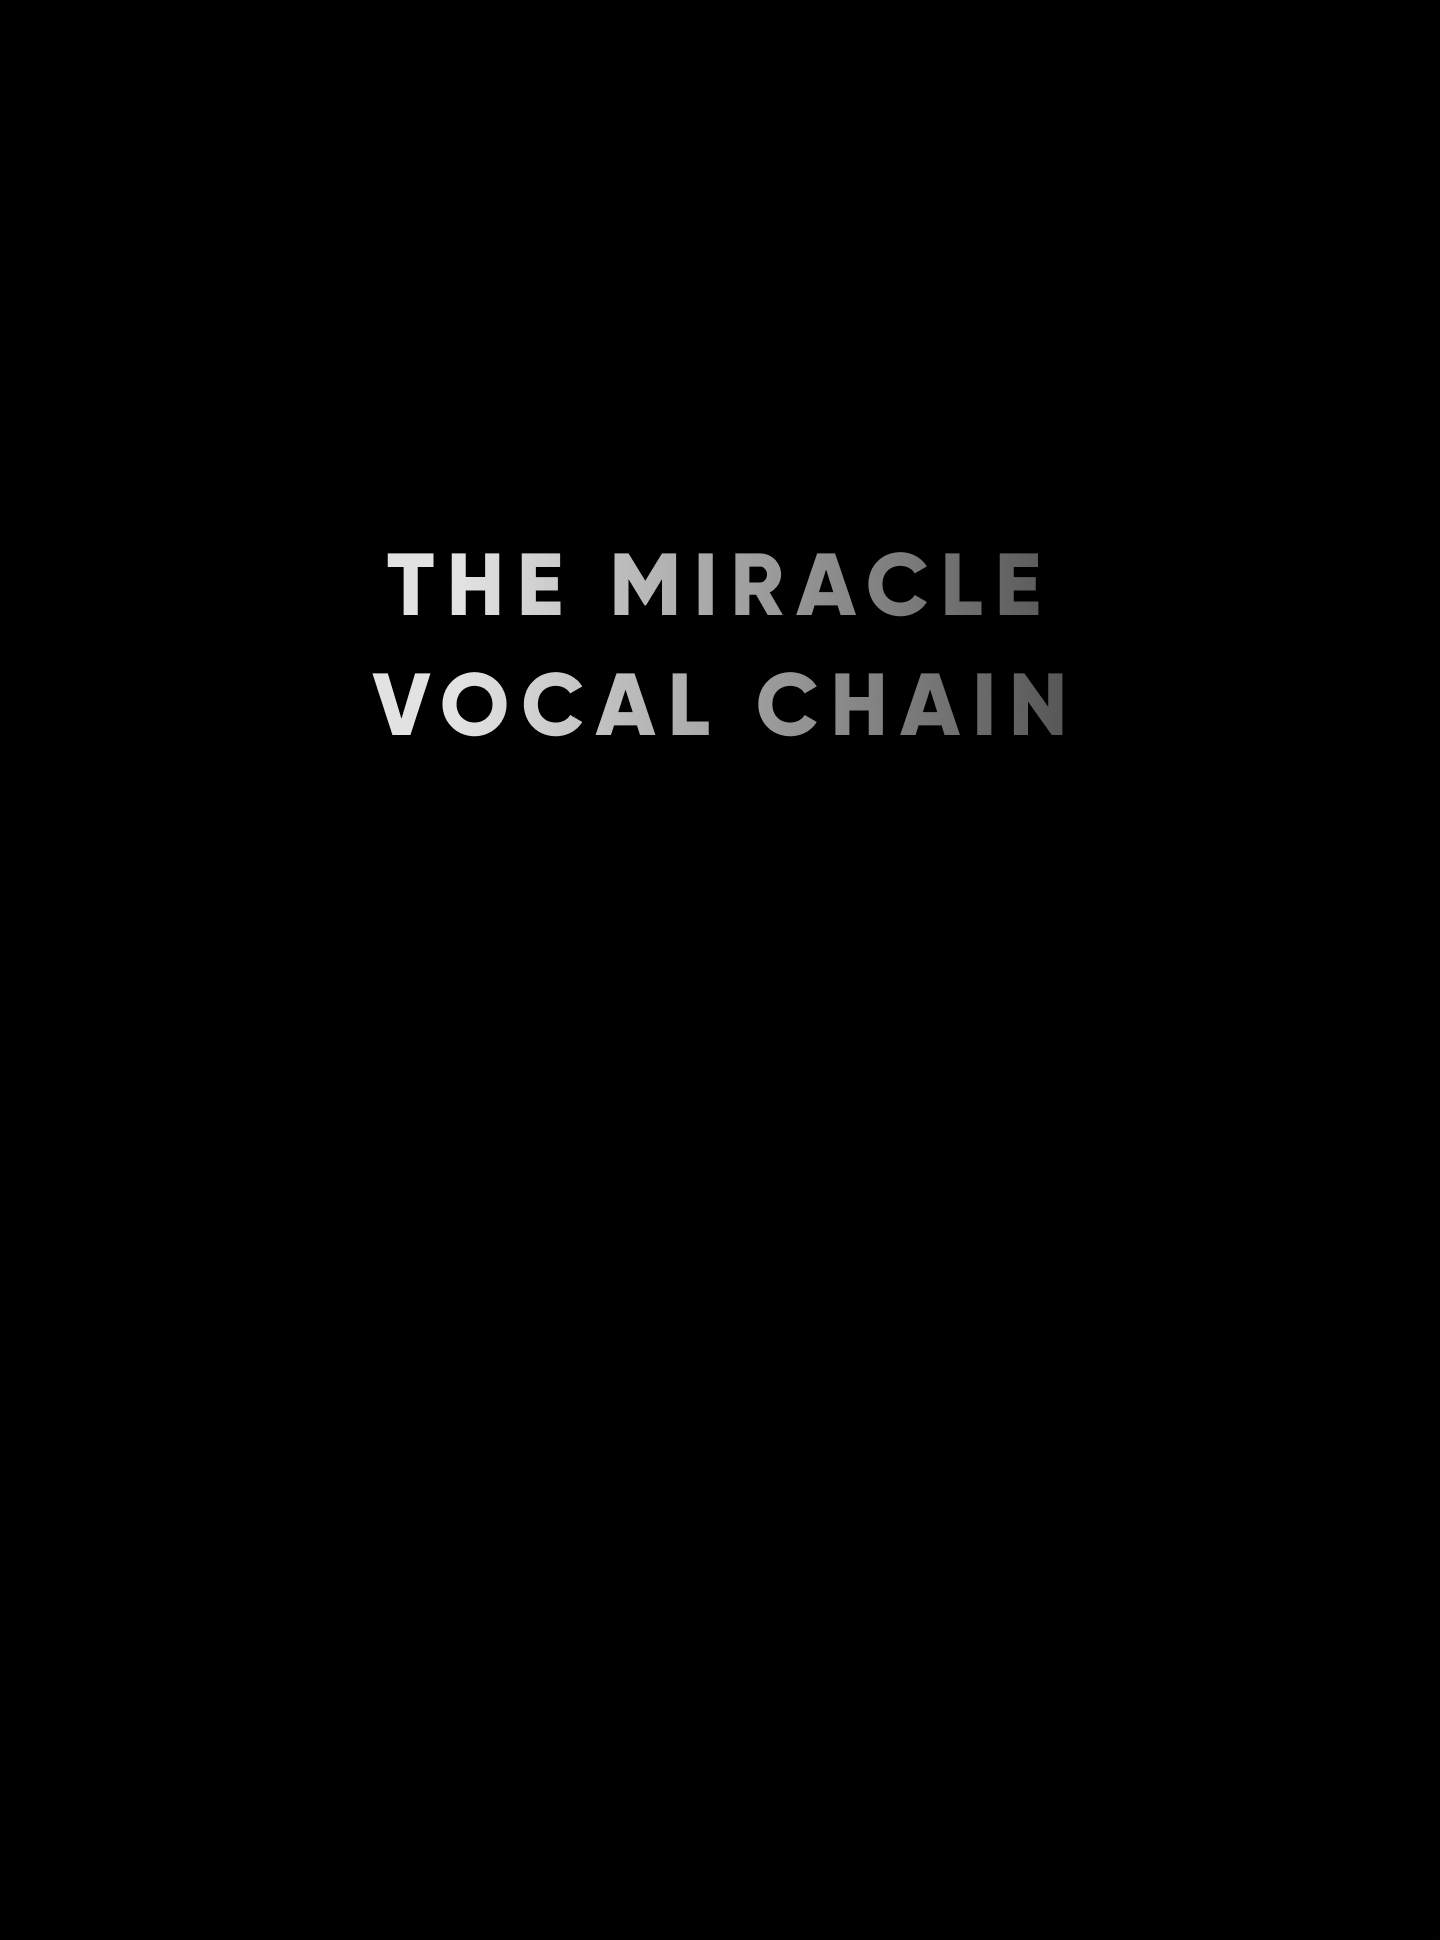 The Miracle Vocal Chain Logo No Background
